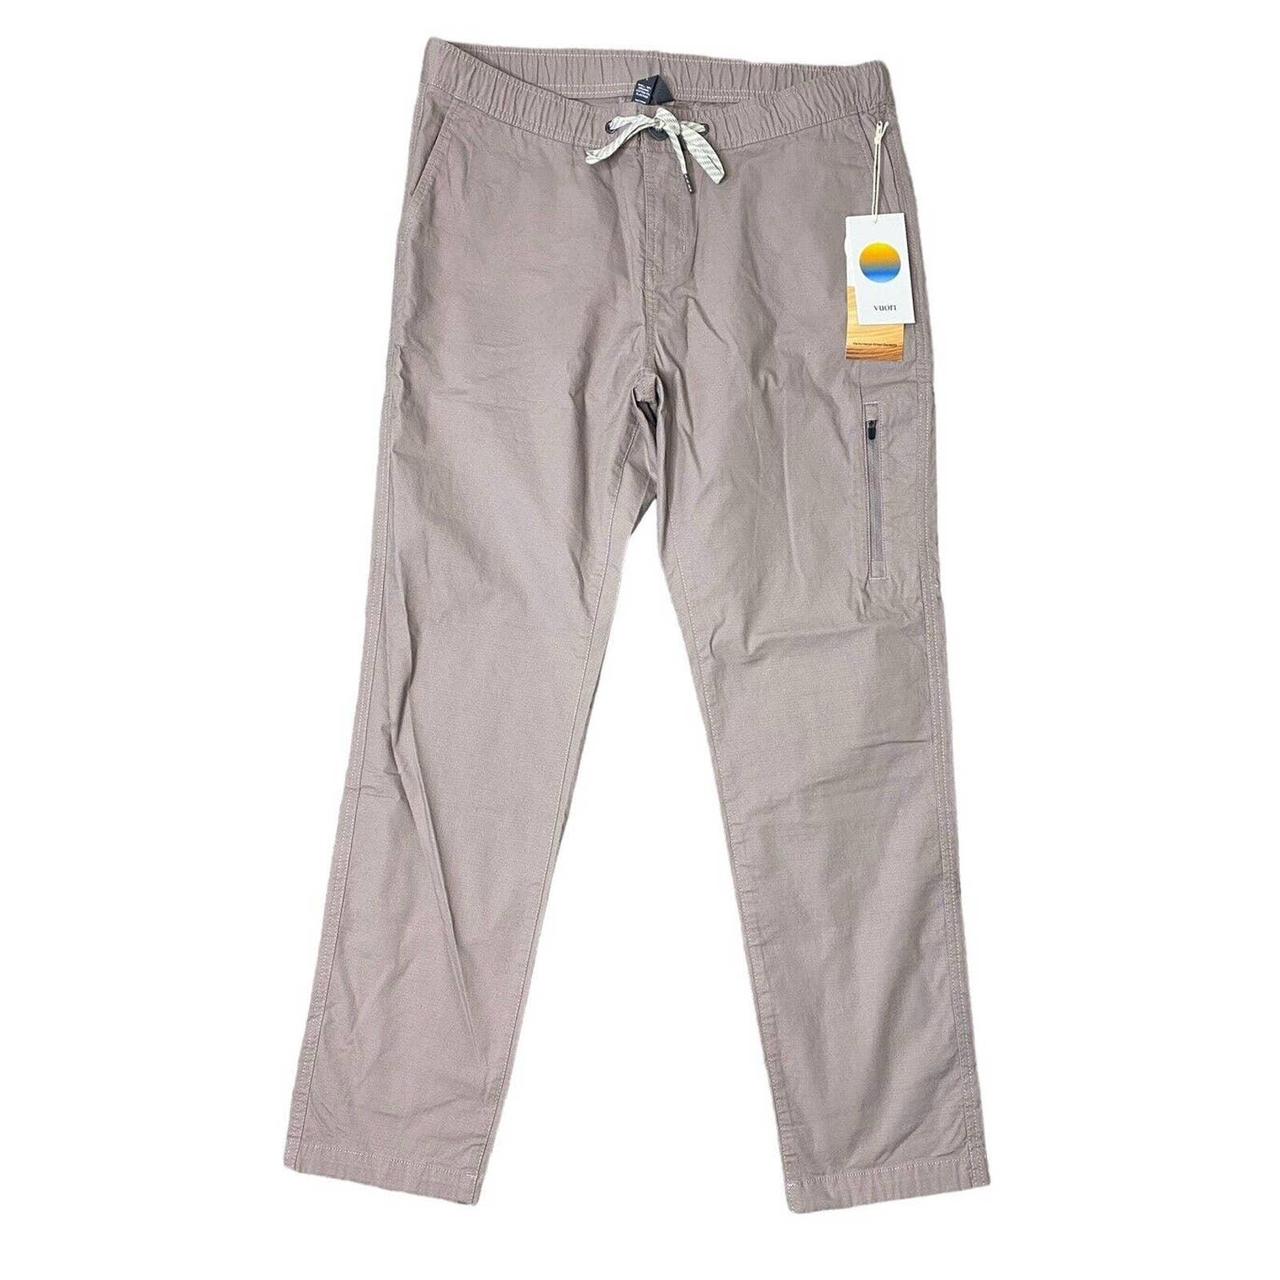 new with tags vuori womens grey ripstop pants size s